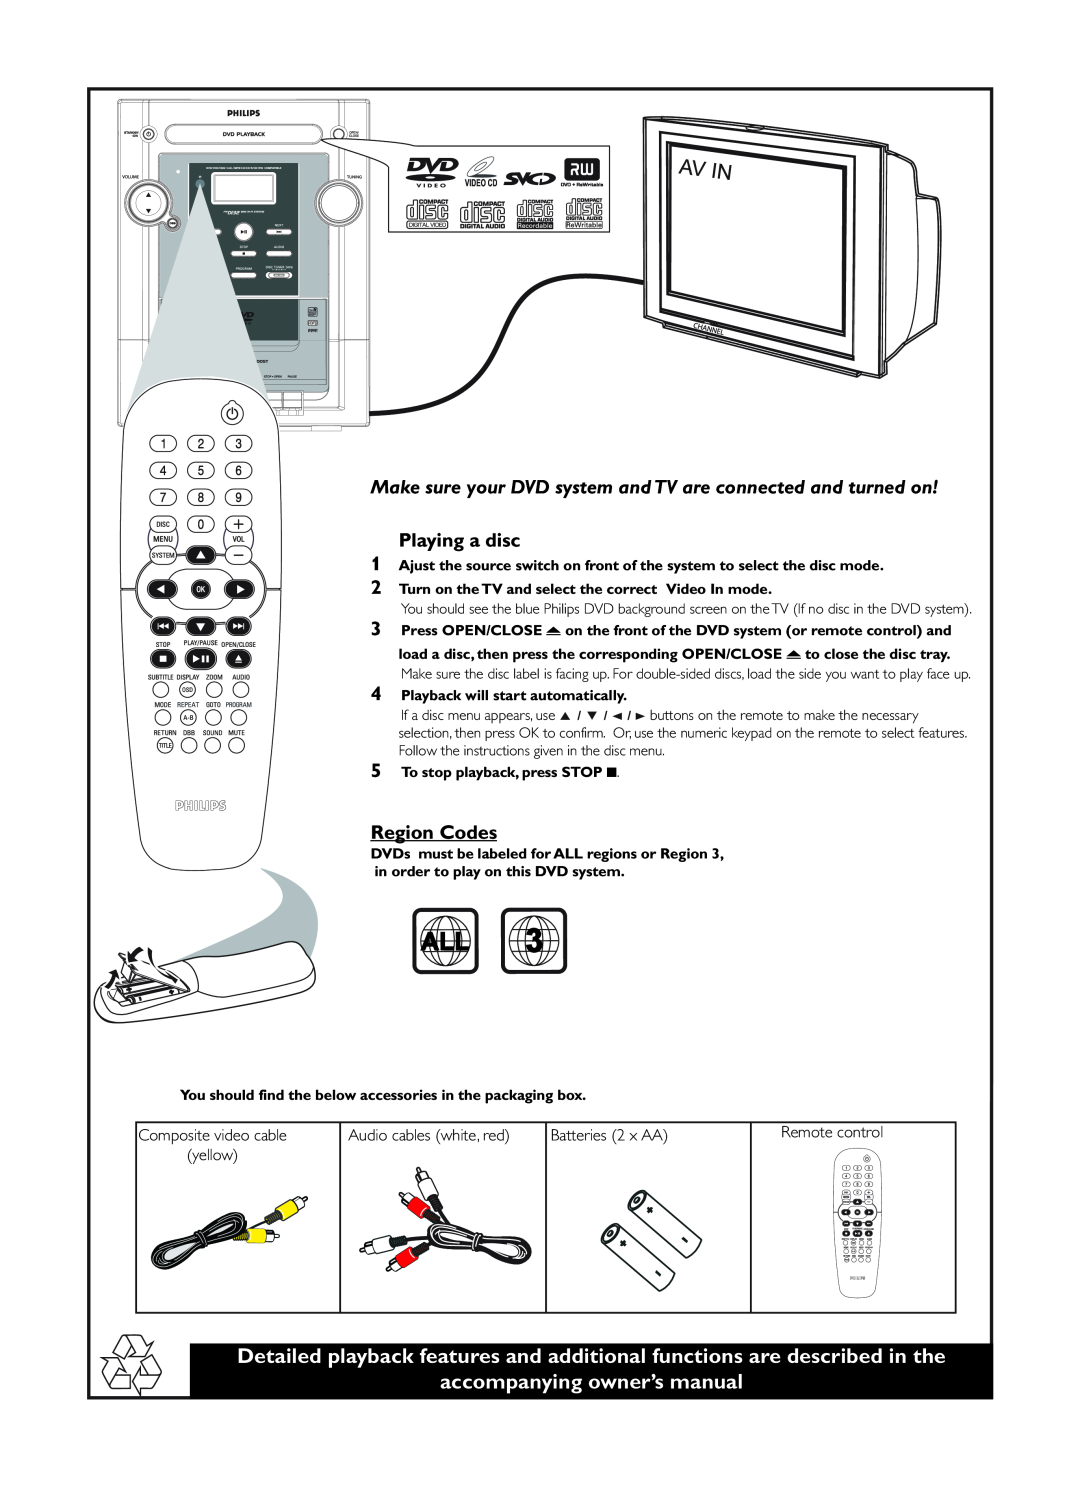 Philips FWD132/98 manual Make sure your DVD system and TV are connected and turned on, Playing a disc, Region Codes 